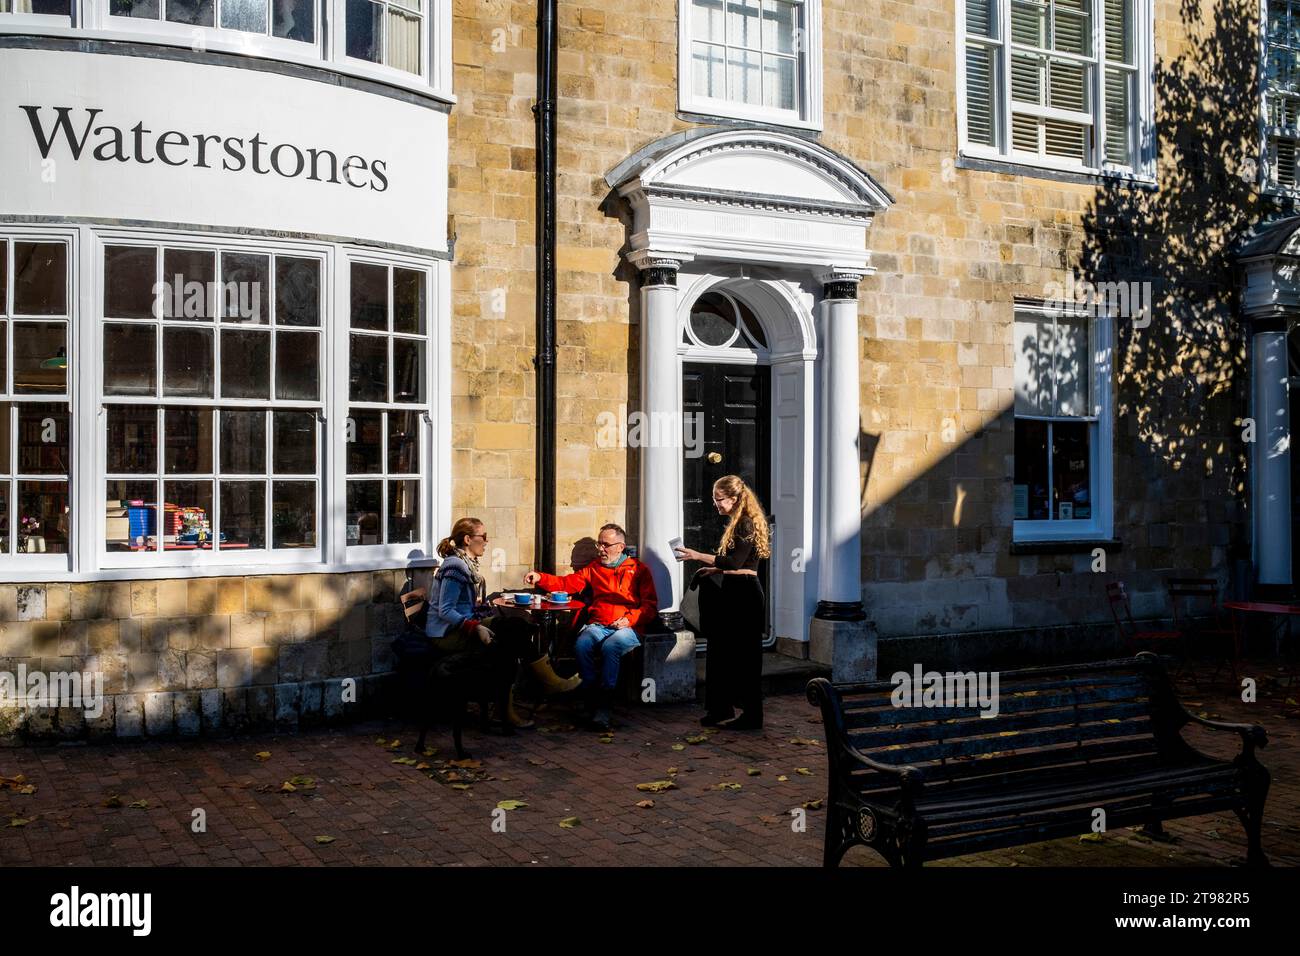 Two People Sitting Outside A Cafe On A Sunny Day, High Street, Lewes, East Sussex, UK Stock Photo